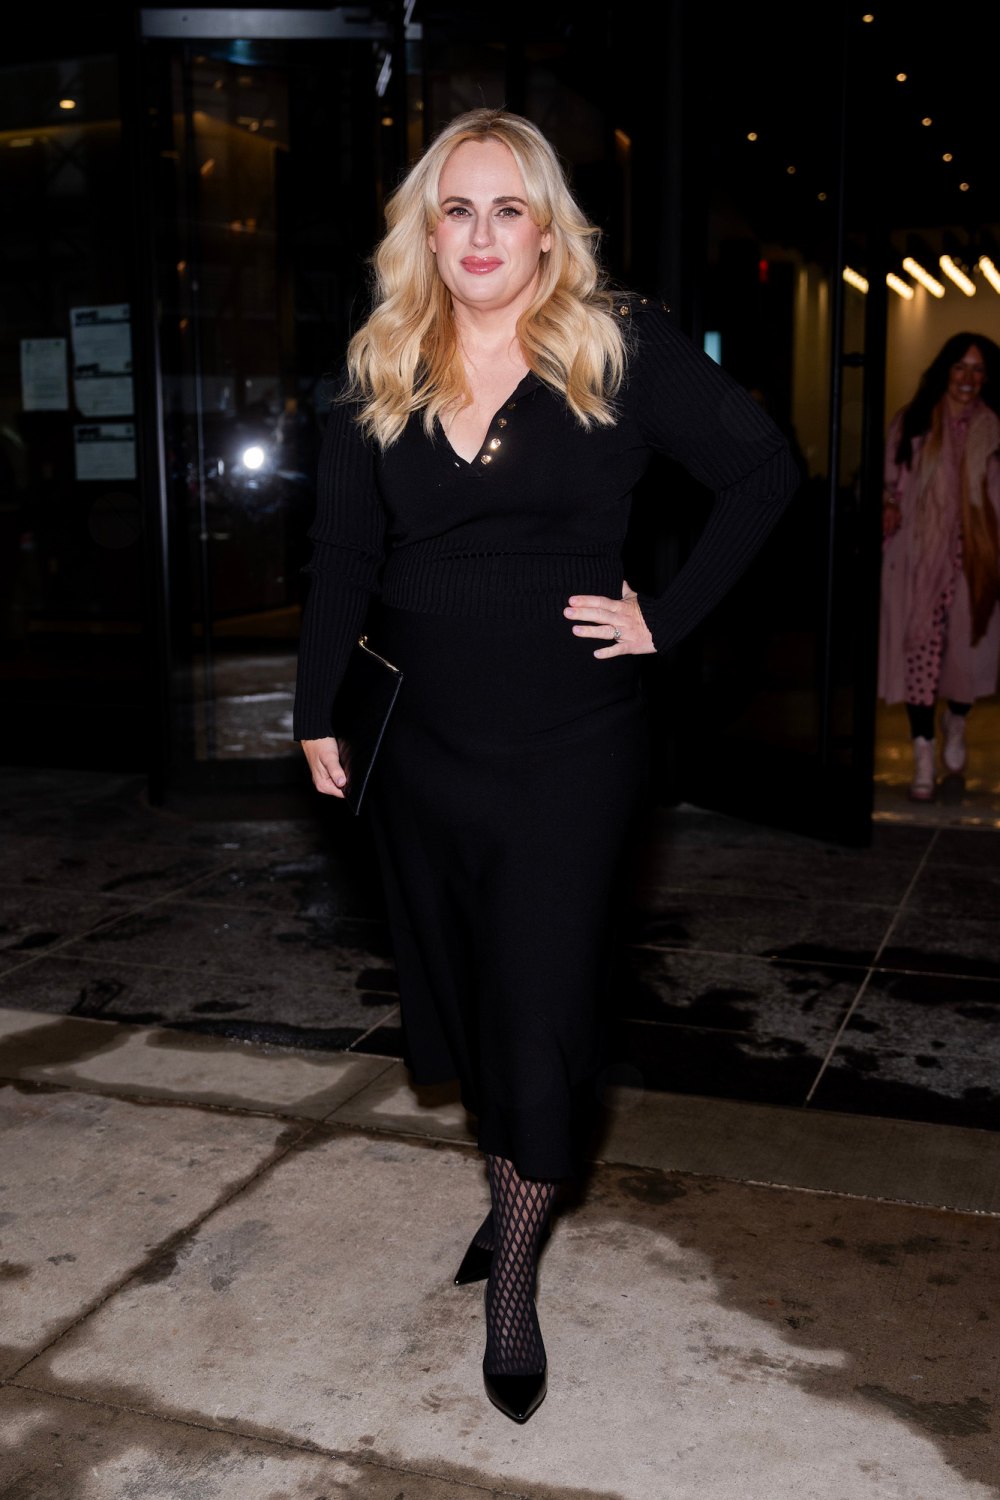 Rebel Wilson Attended Drug Fueled Orgy Party With Royal Family Member